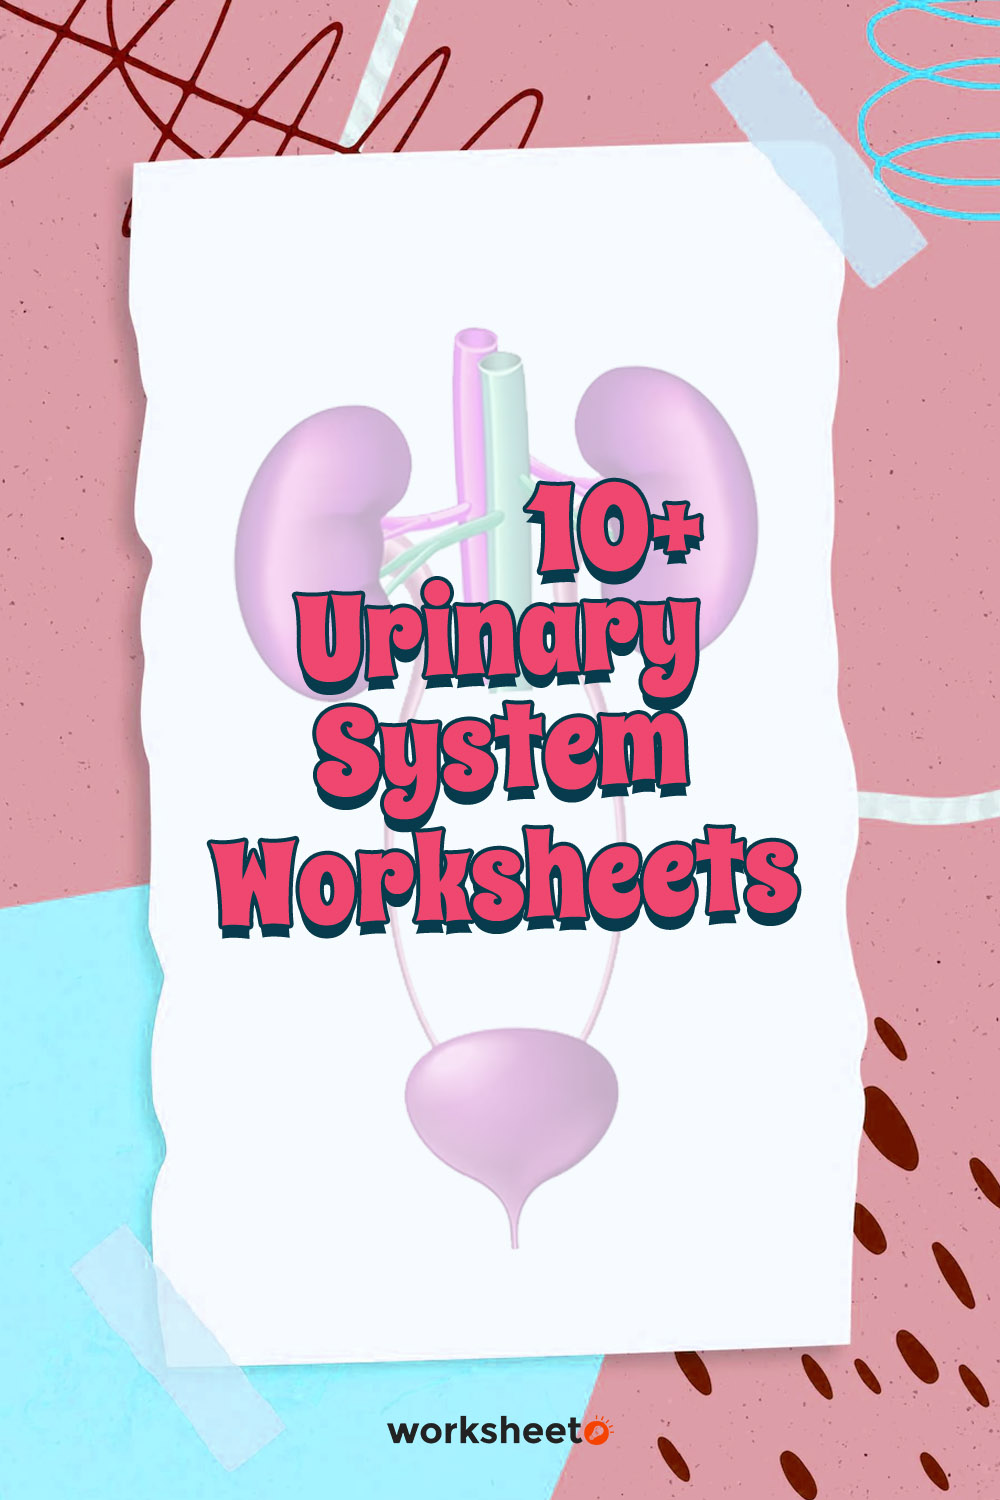 17 Images of Urinary System Worksheets